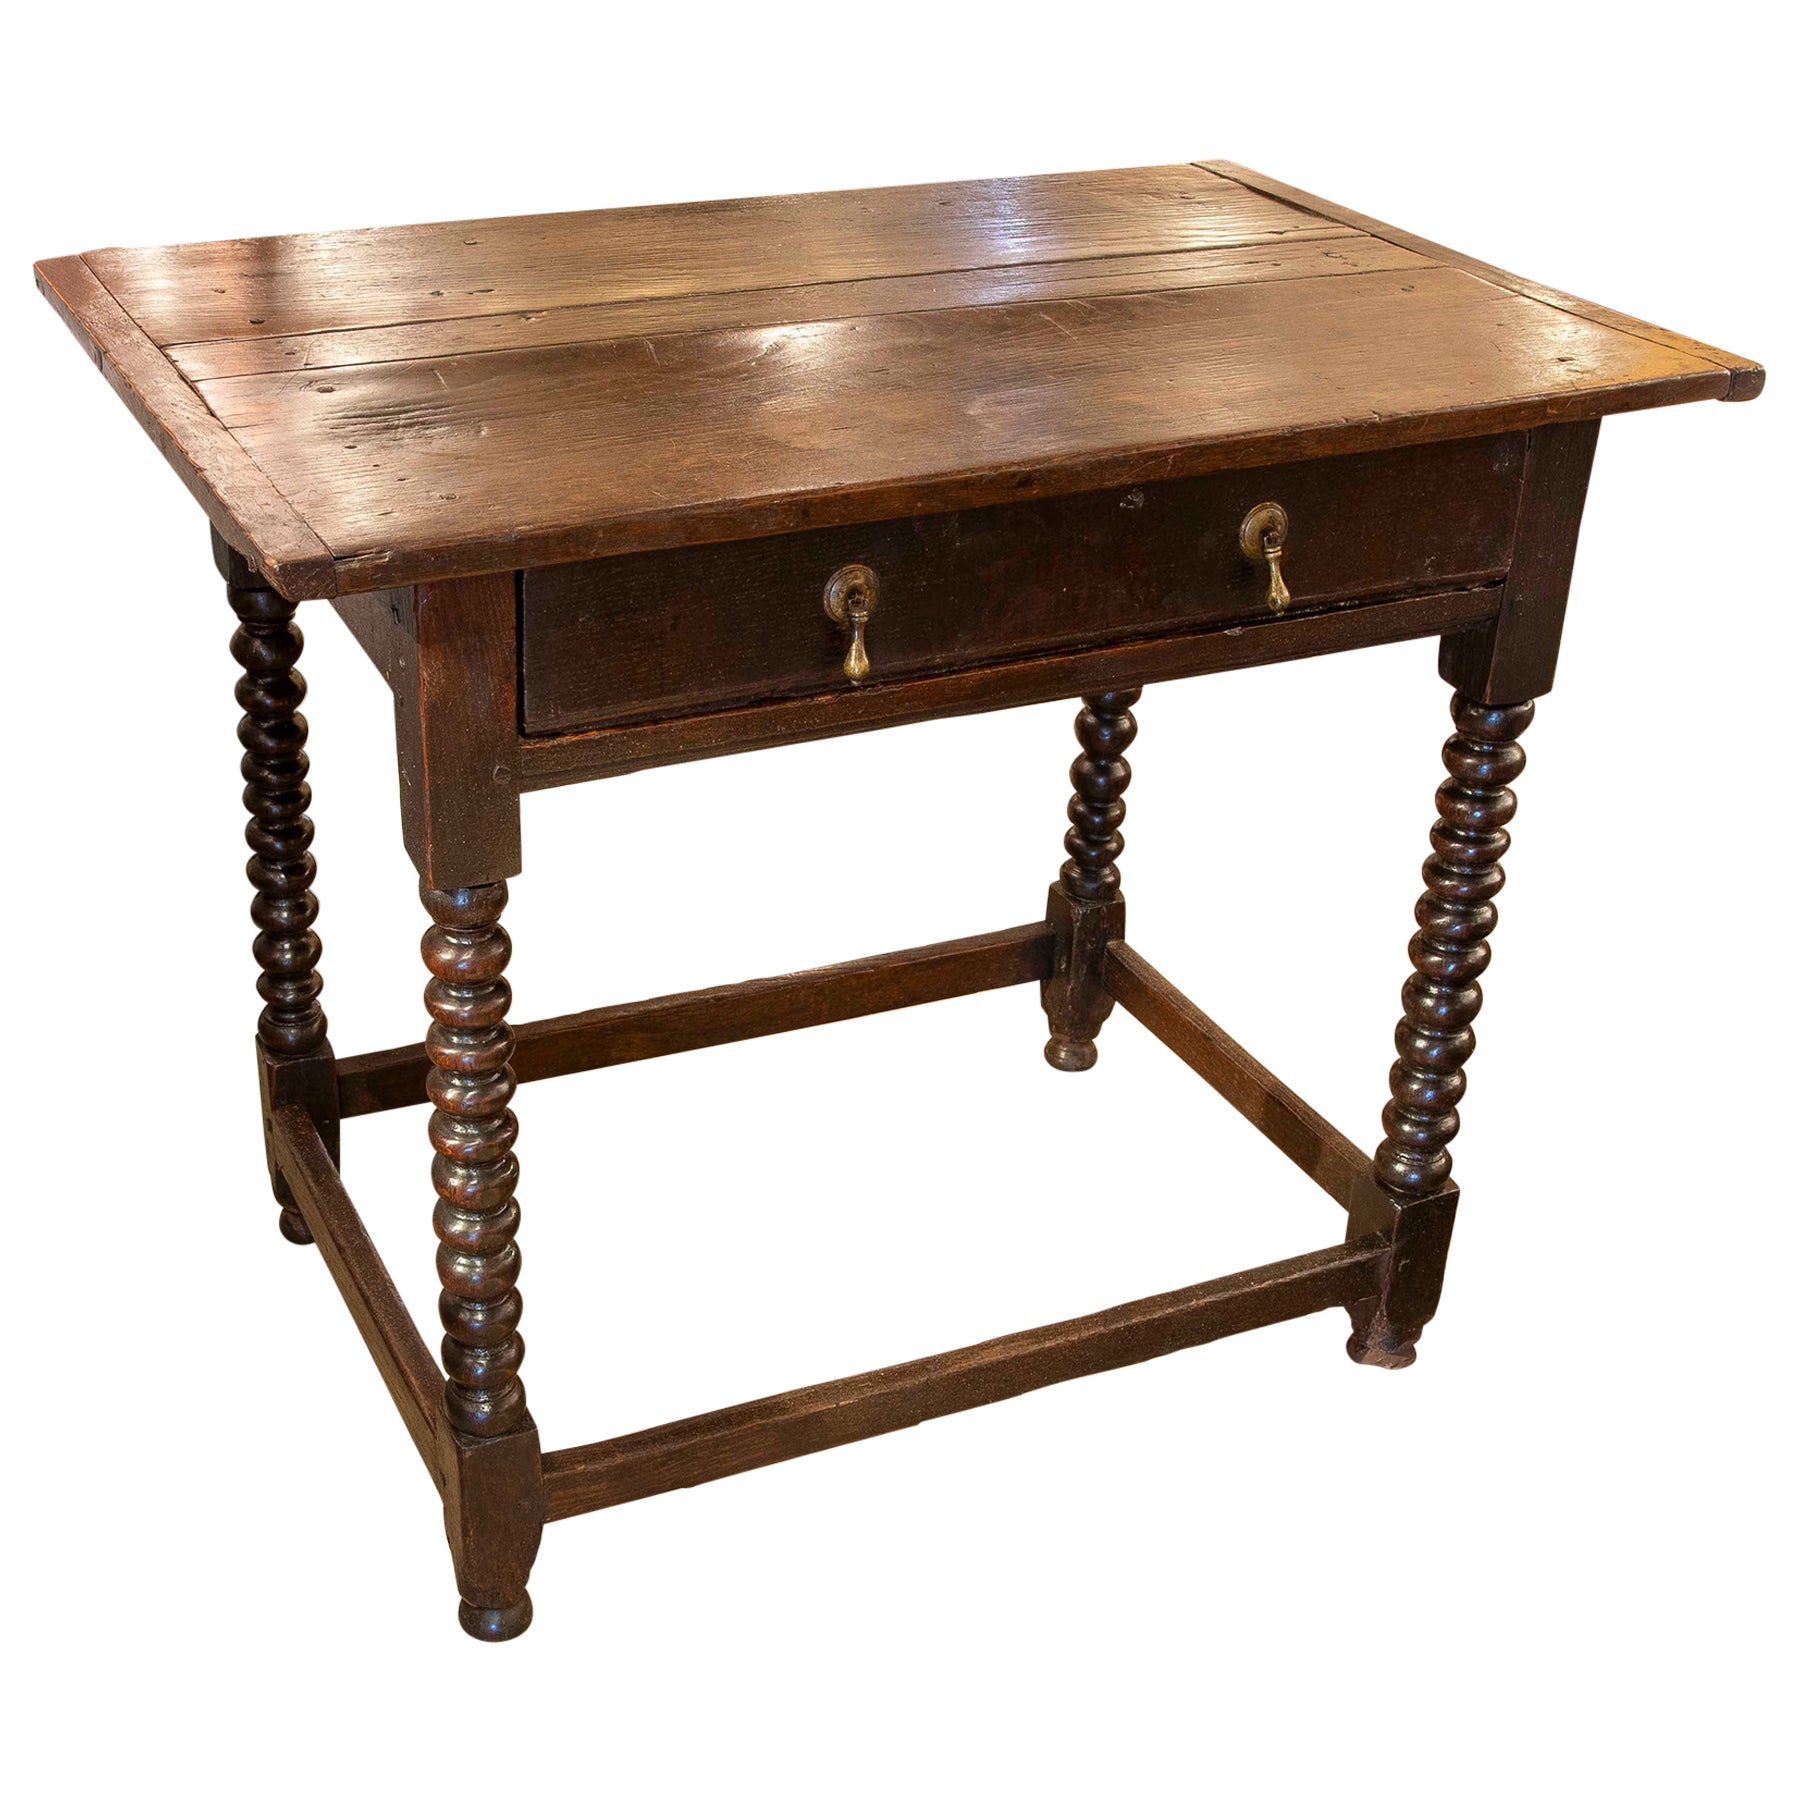 19th Century Spanish Wooden Table with Drawer with Turned Legs